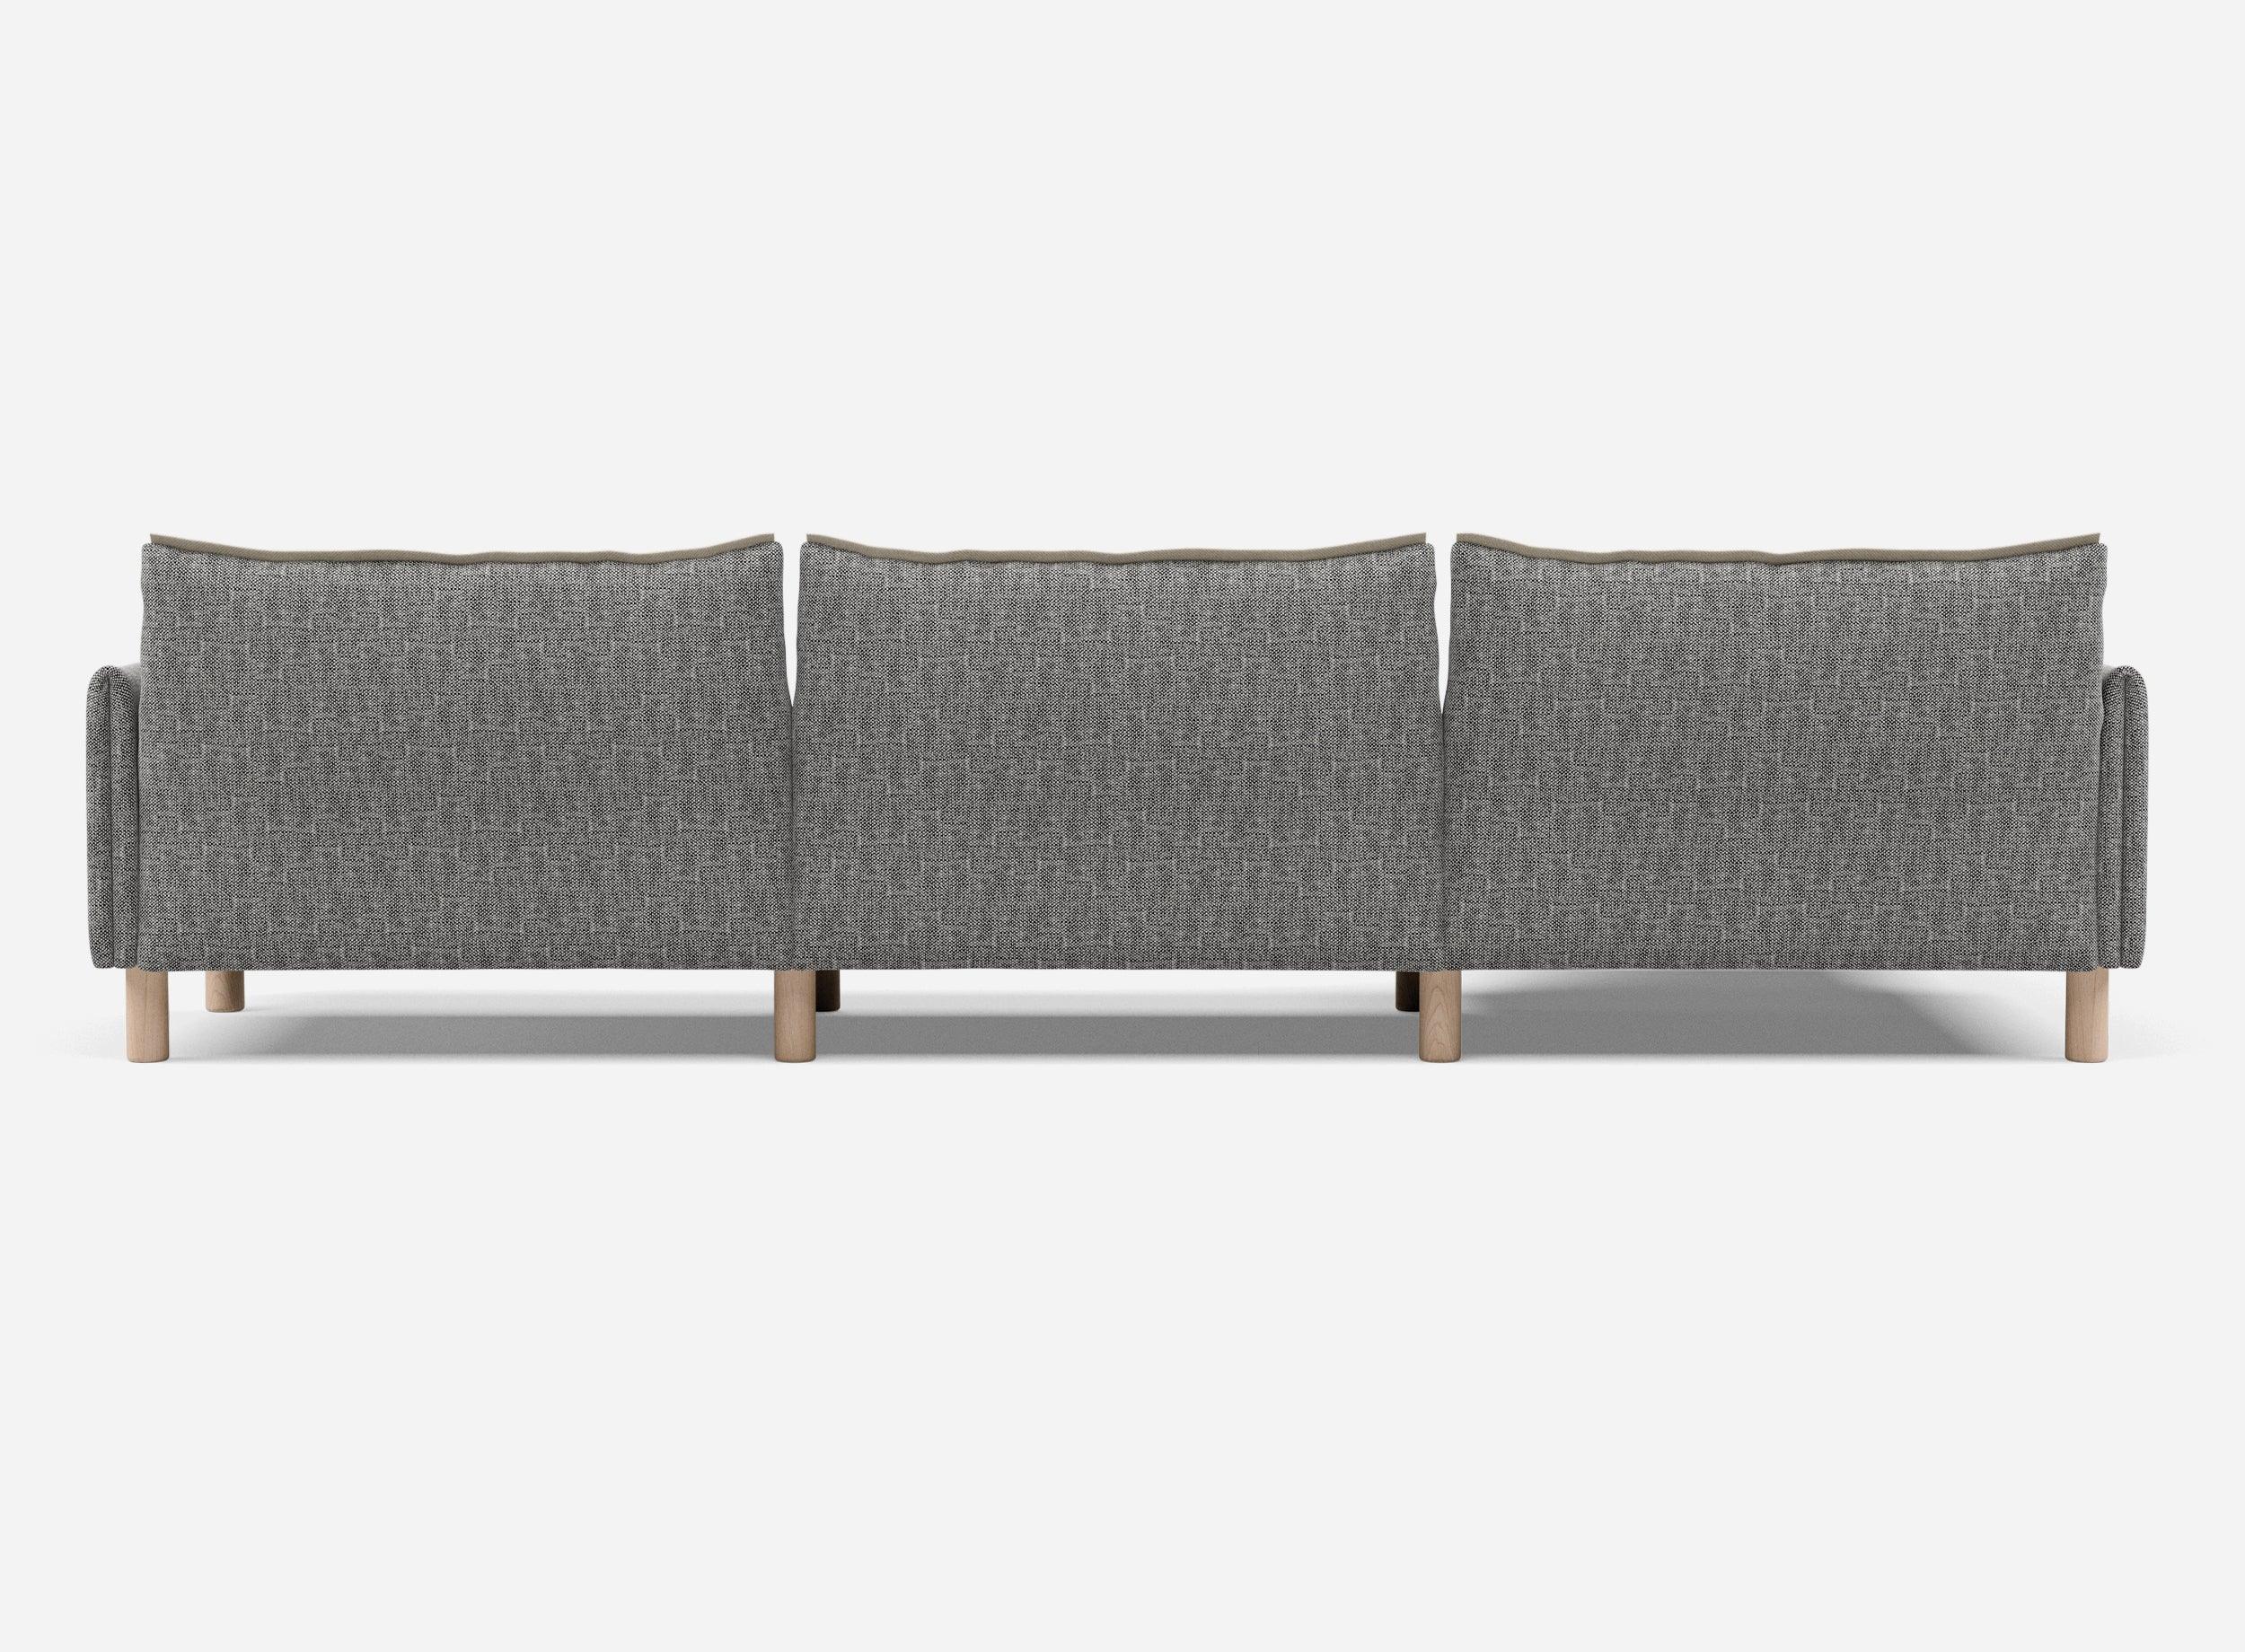 5 Seater Chaise Corner Right Hand Sofa | Textured Weave Salt & Pepper - Cozmo @ Salt & Pepper Textured Weave Jacket | Natural Trim